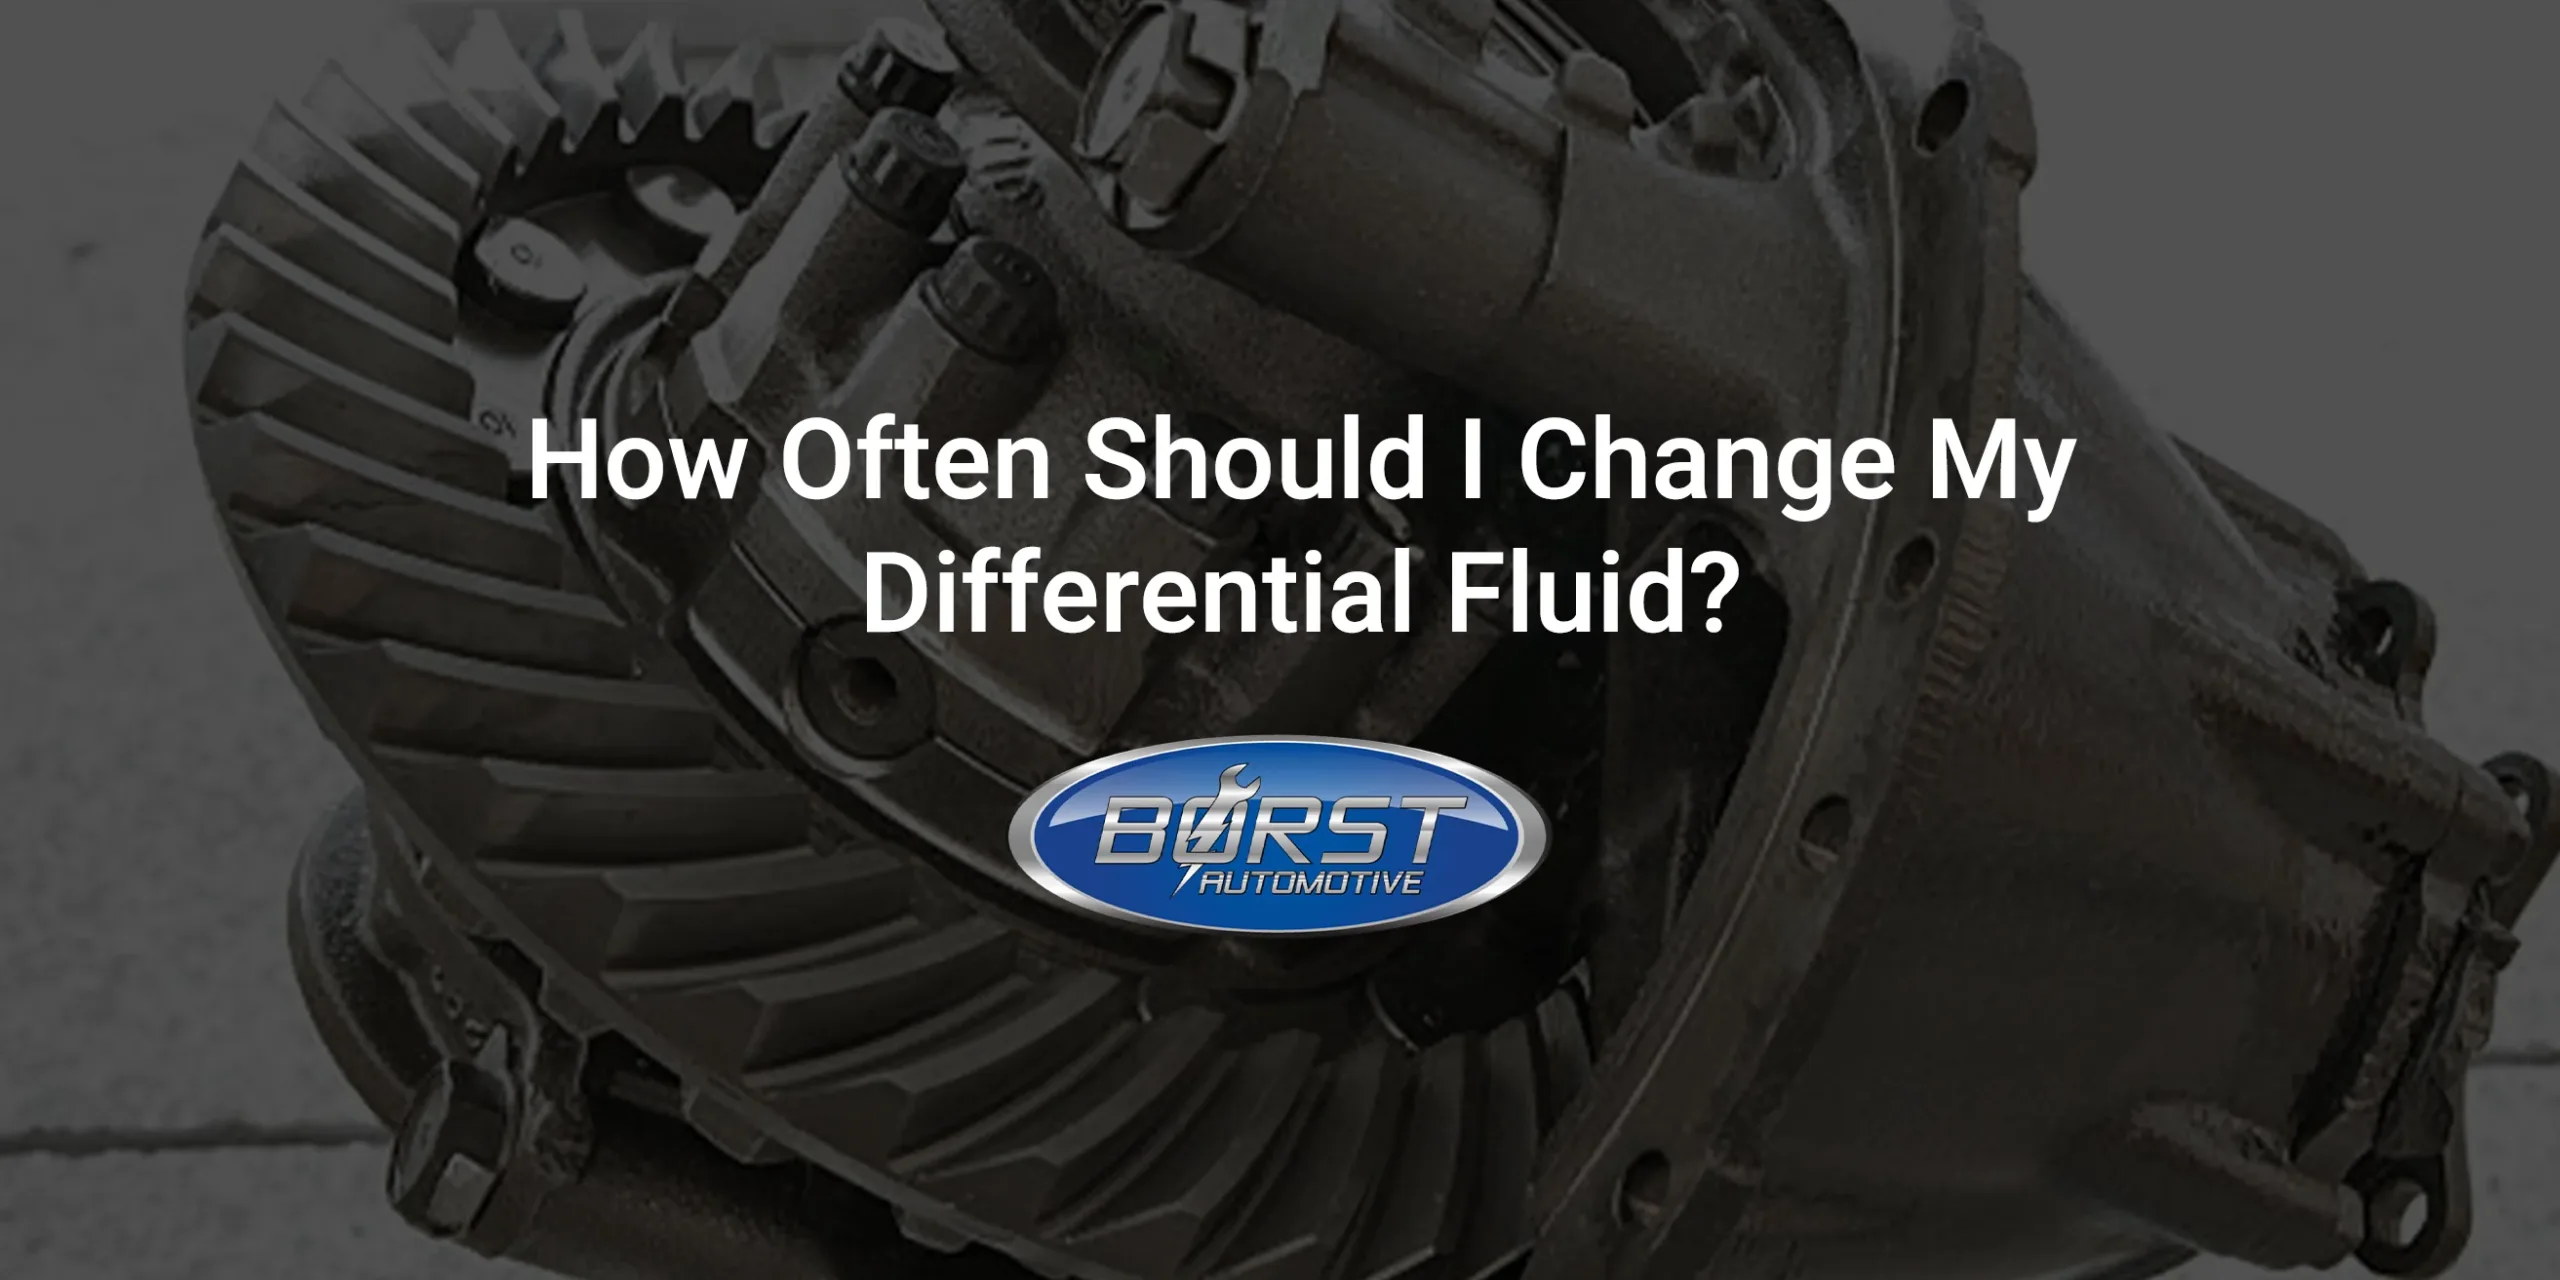 How Often Should I Change My Differential Fluid?